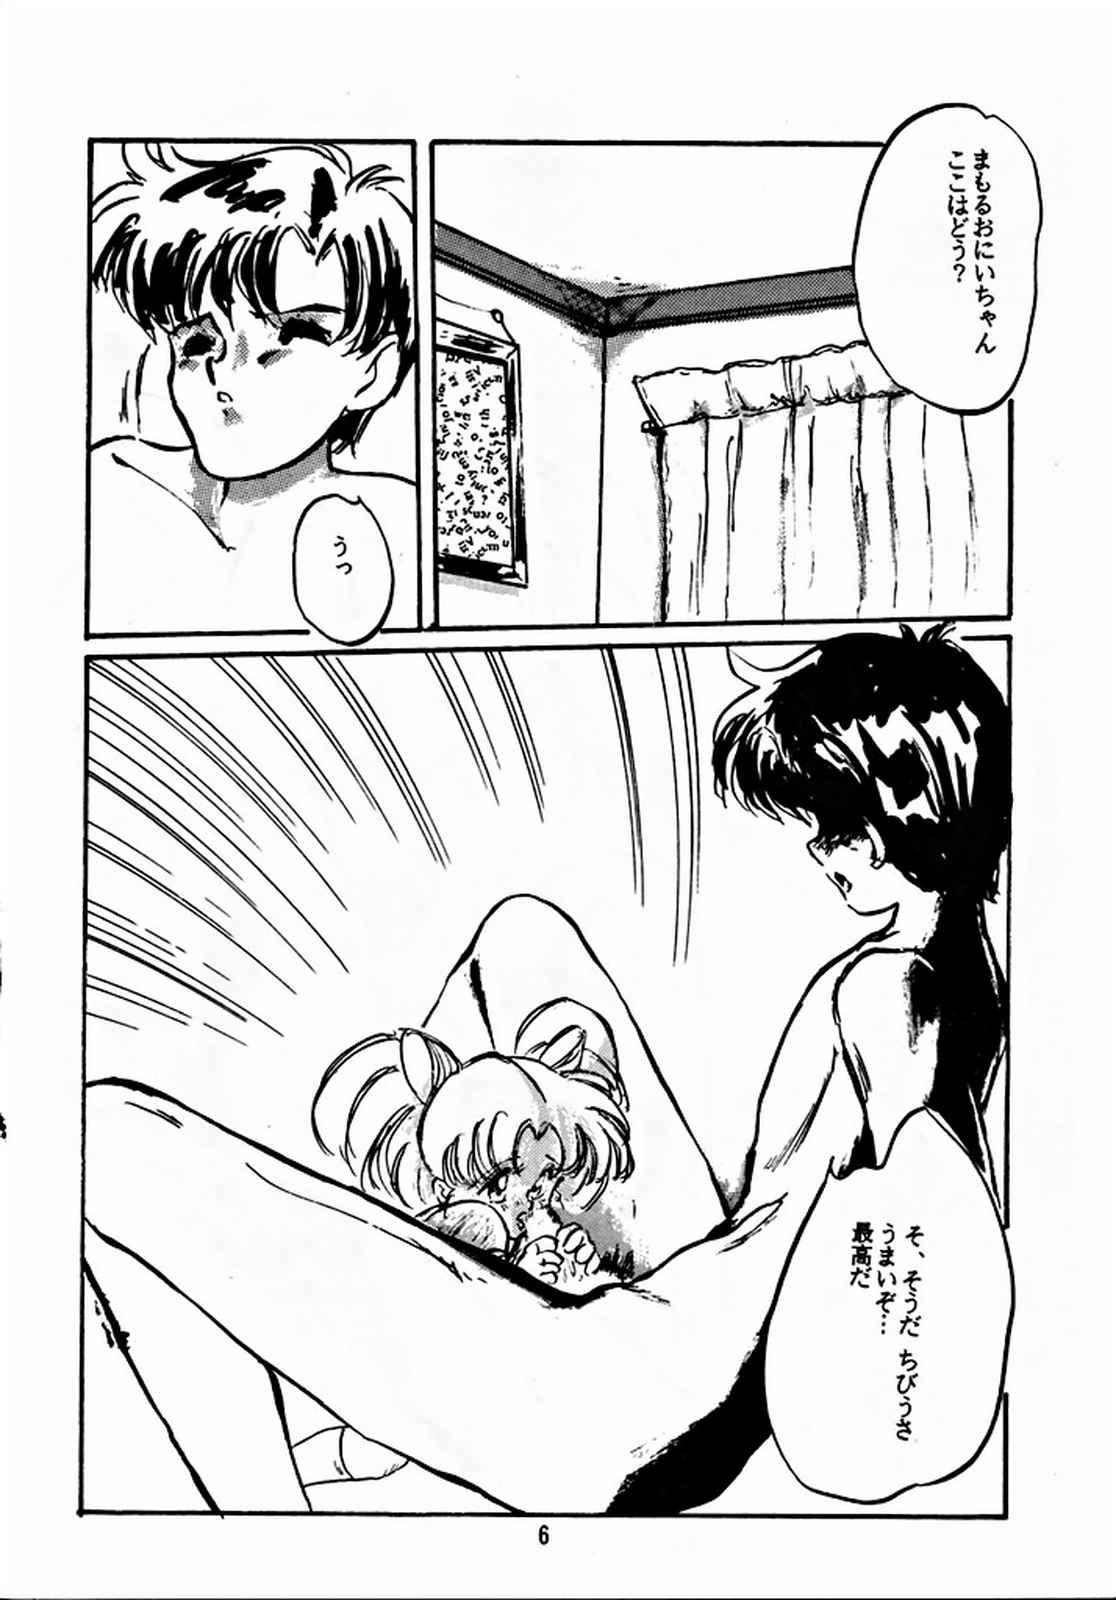 Missionary Position Porn Hakubo - Sailor moon Shavedpussy - Page 5